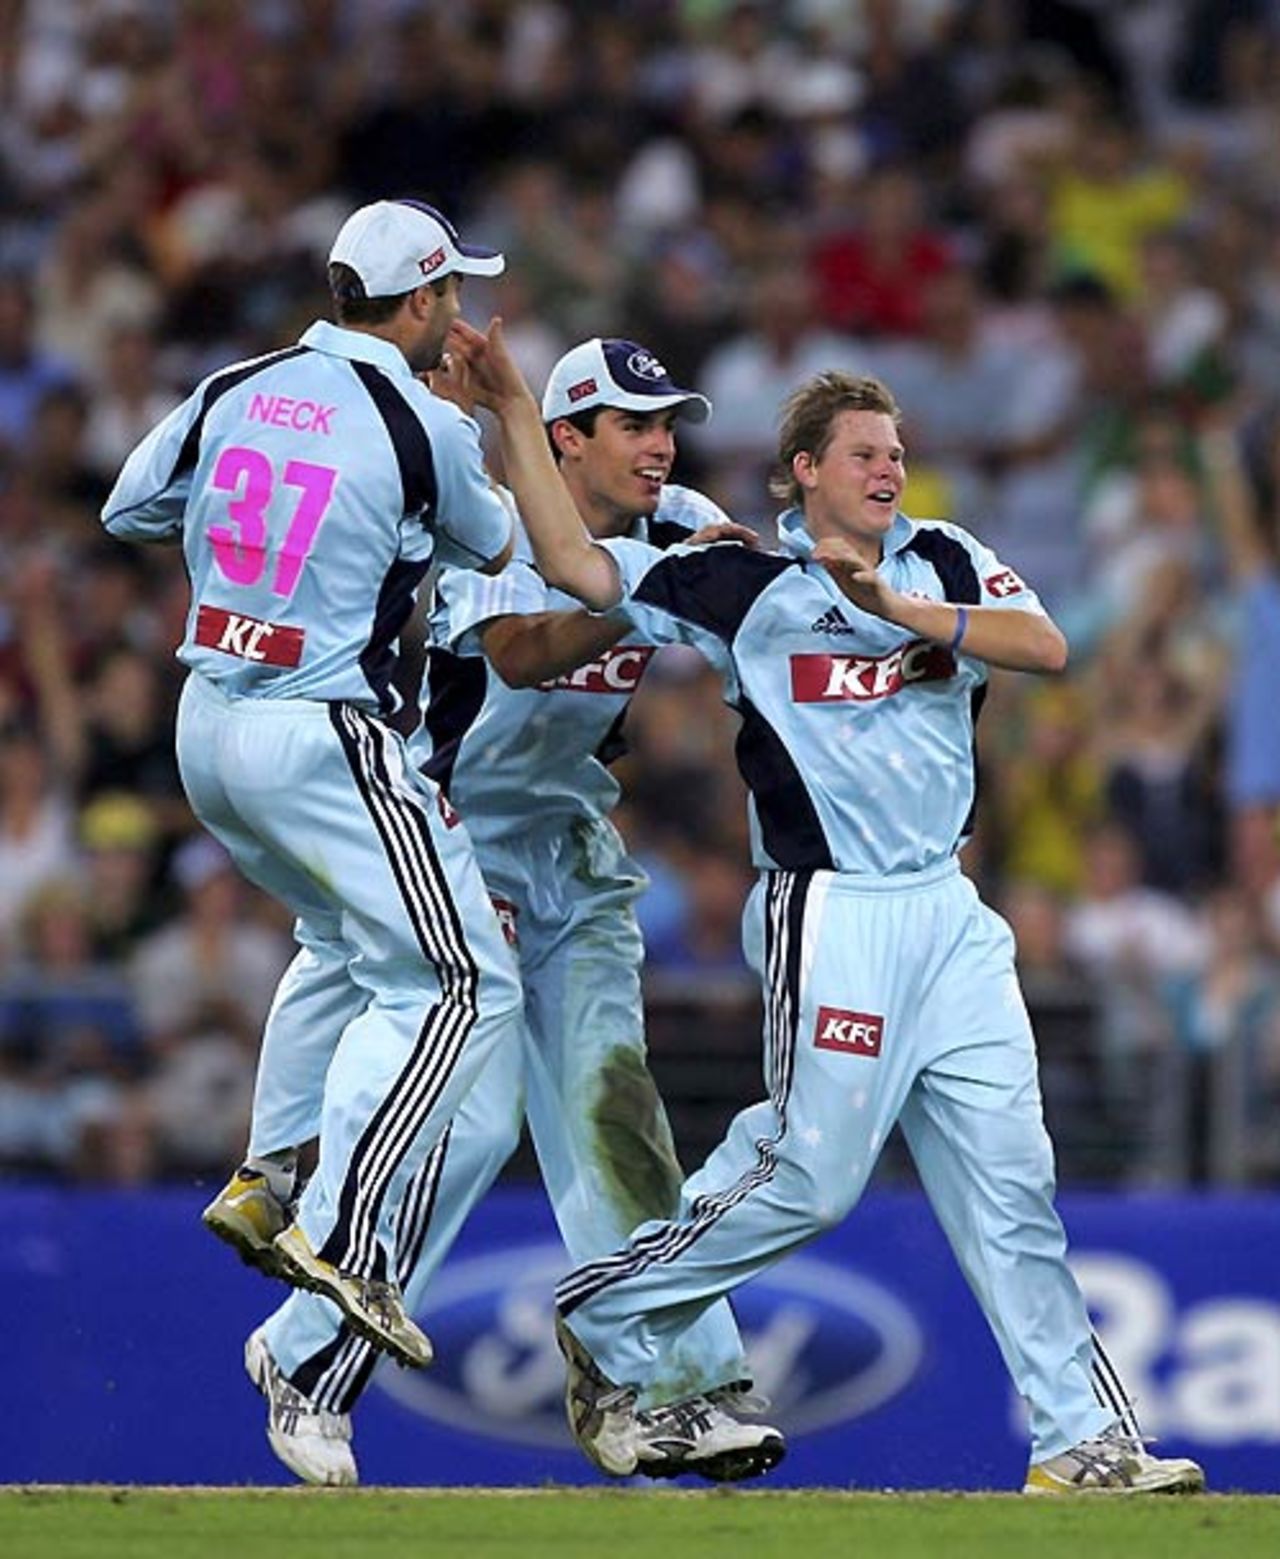 Steven Smith wrecked the Queensland lower order with 4 for 15, New South Wales v Queensland, KFC Twenty20, ANZ Stadium, Sydney, January 8, 2008 